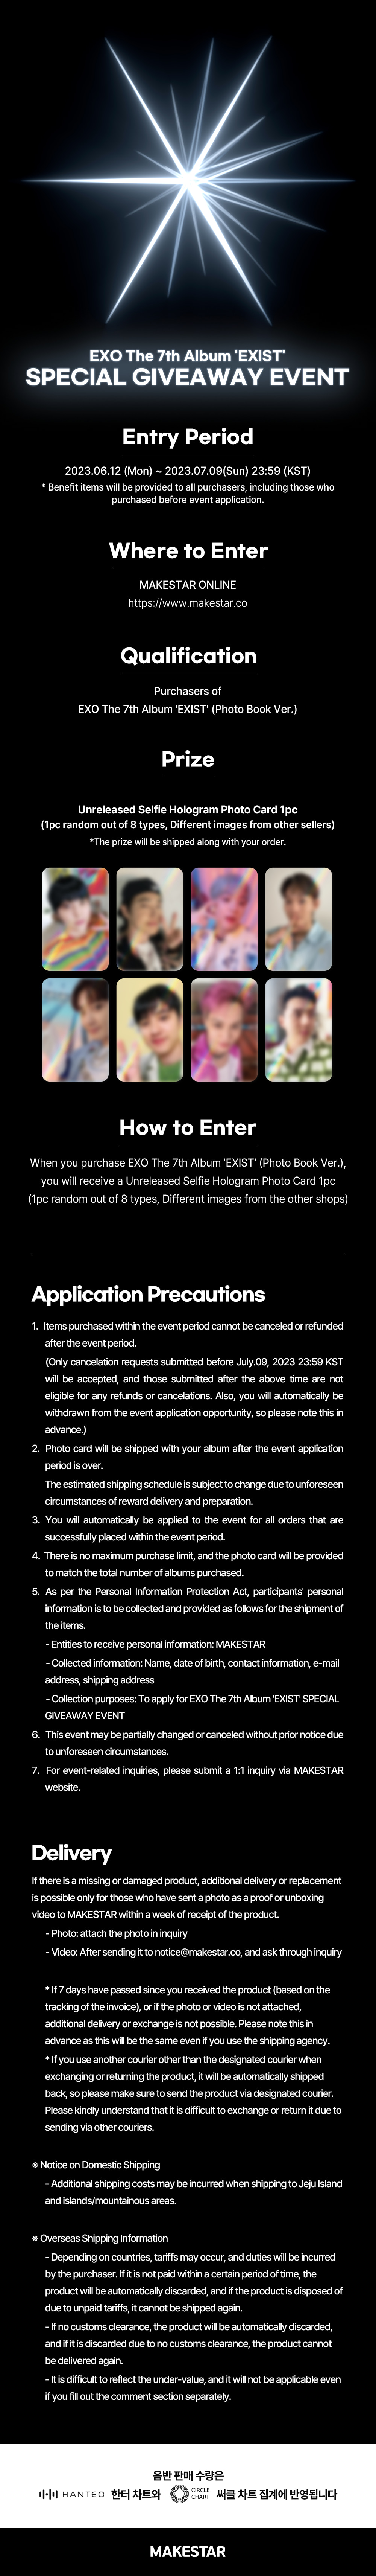 EXO The 7th Album 'EXIST' SPECIAL GIVEAWAY EVENT | MAKESTAR